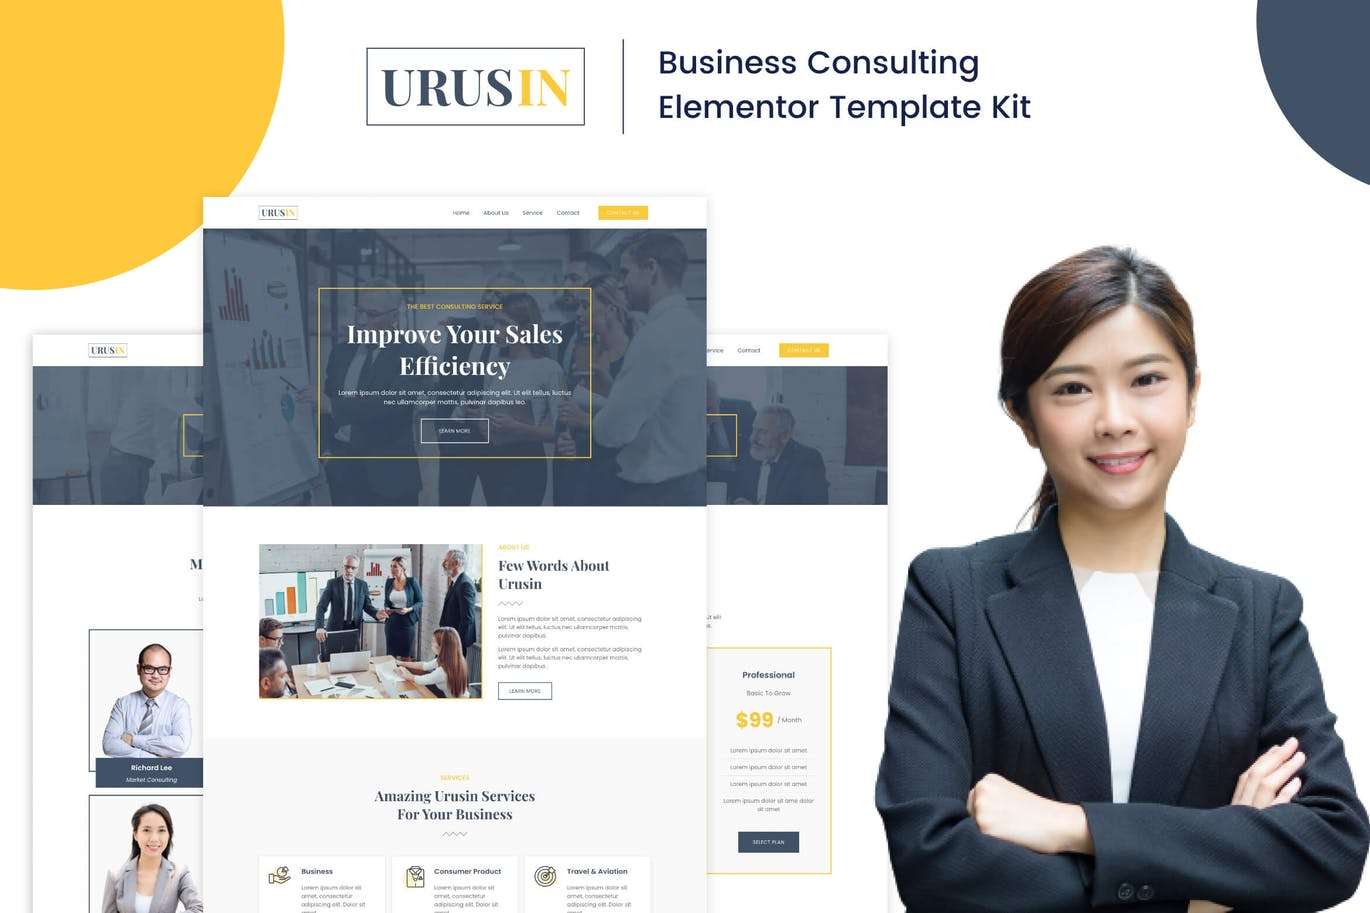 Urusin – Business Consulting Elementor Template Kit